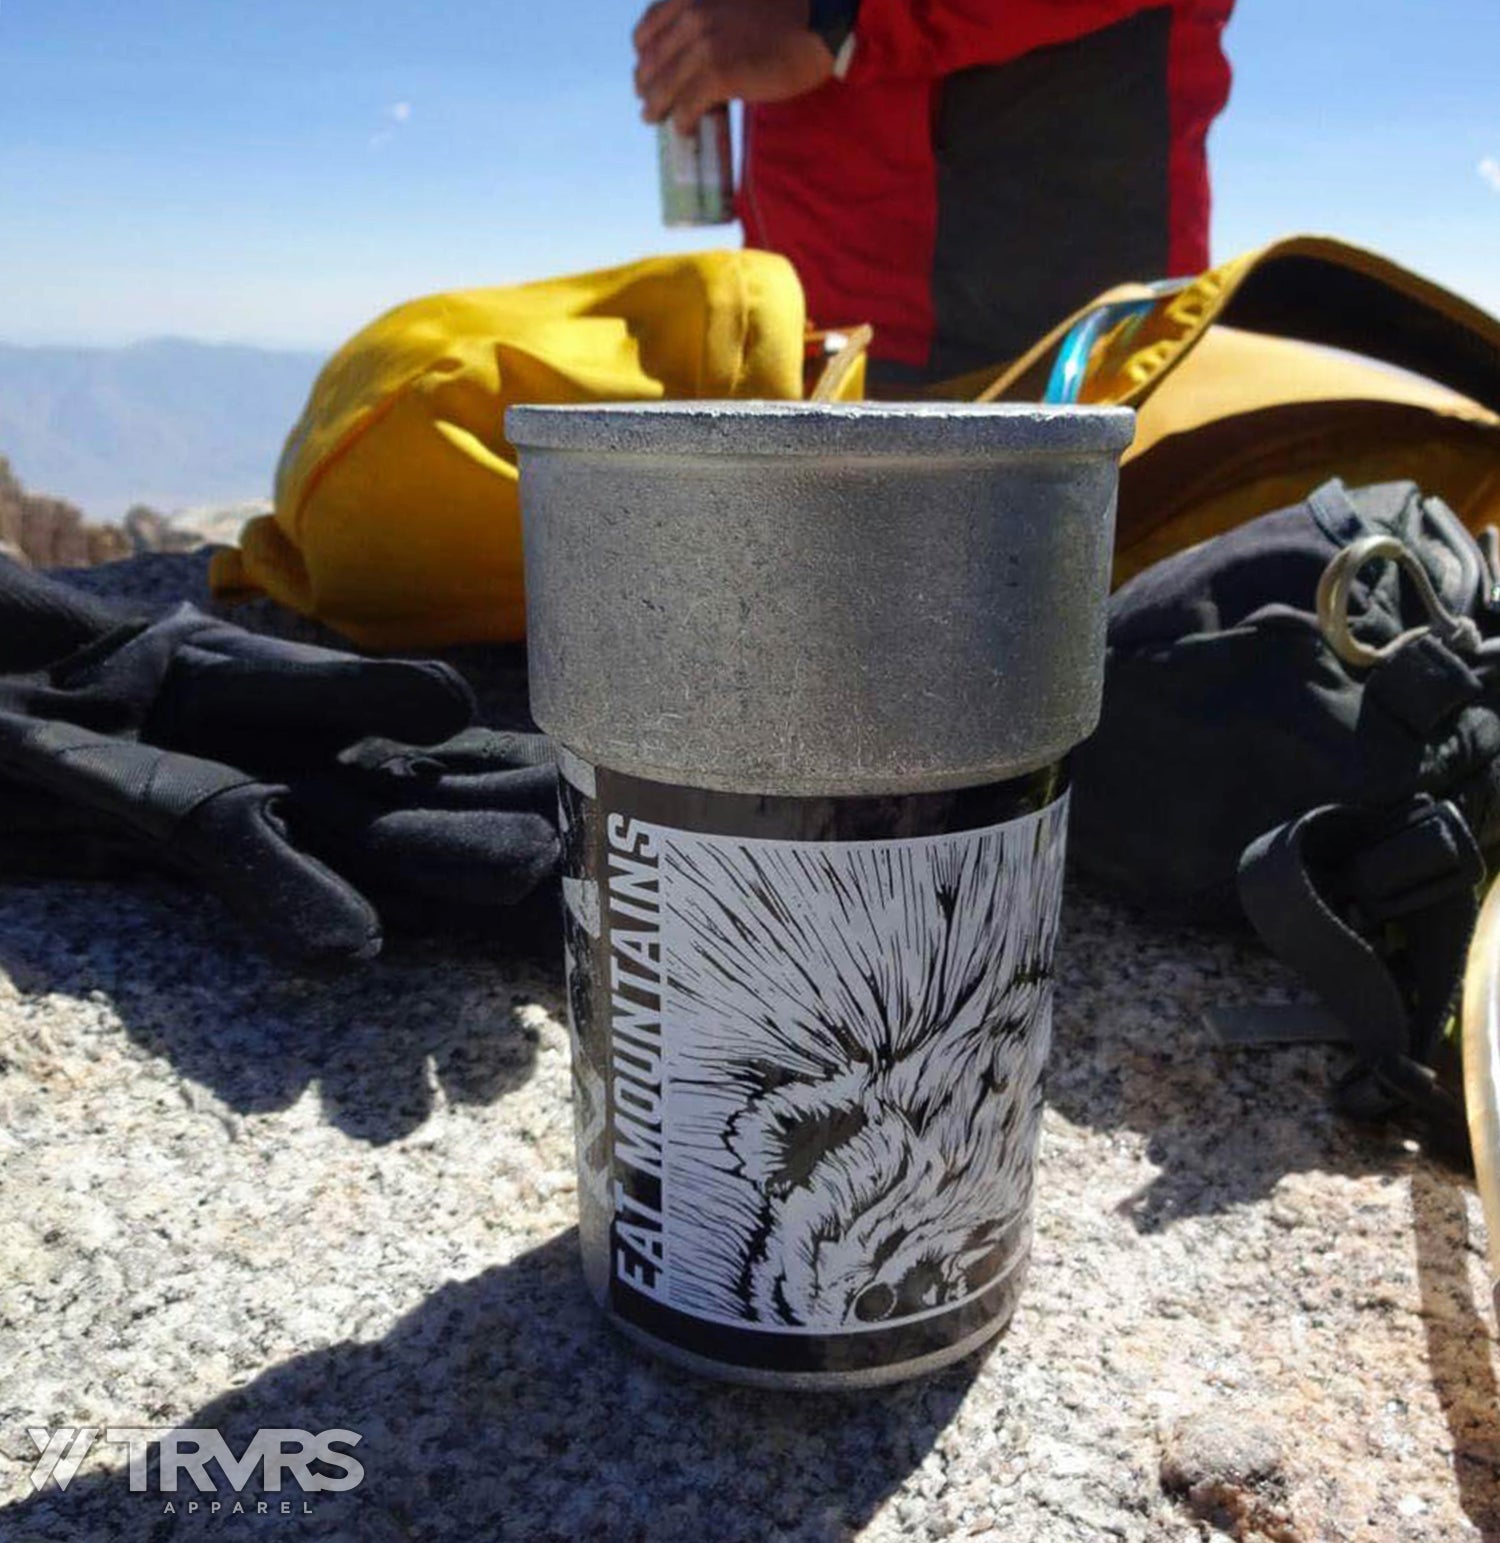 Summit Register of Mount Russell with TRVRS Apparel Sticker | TRVRS APPAREL